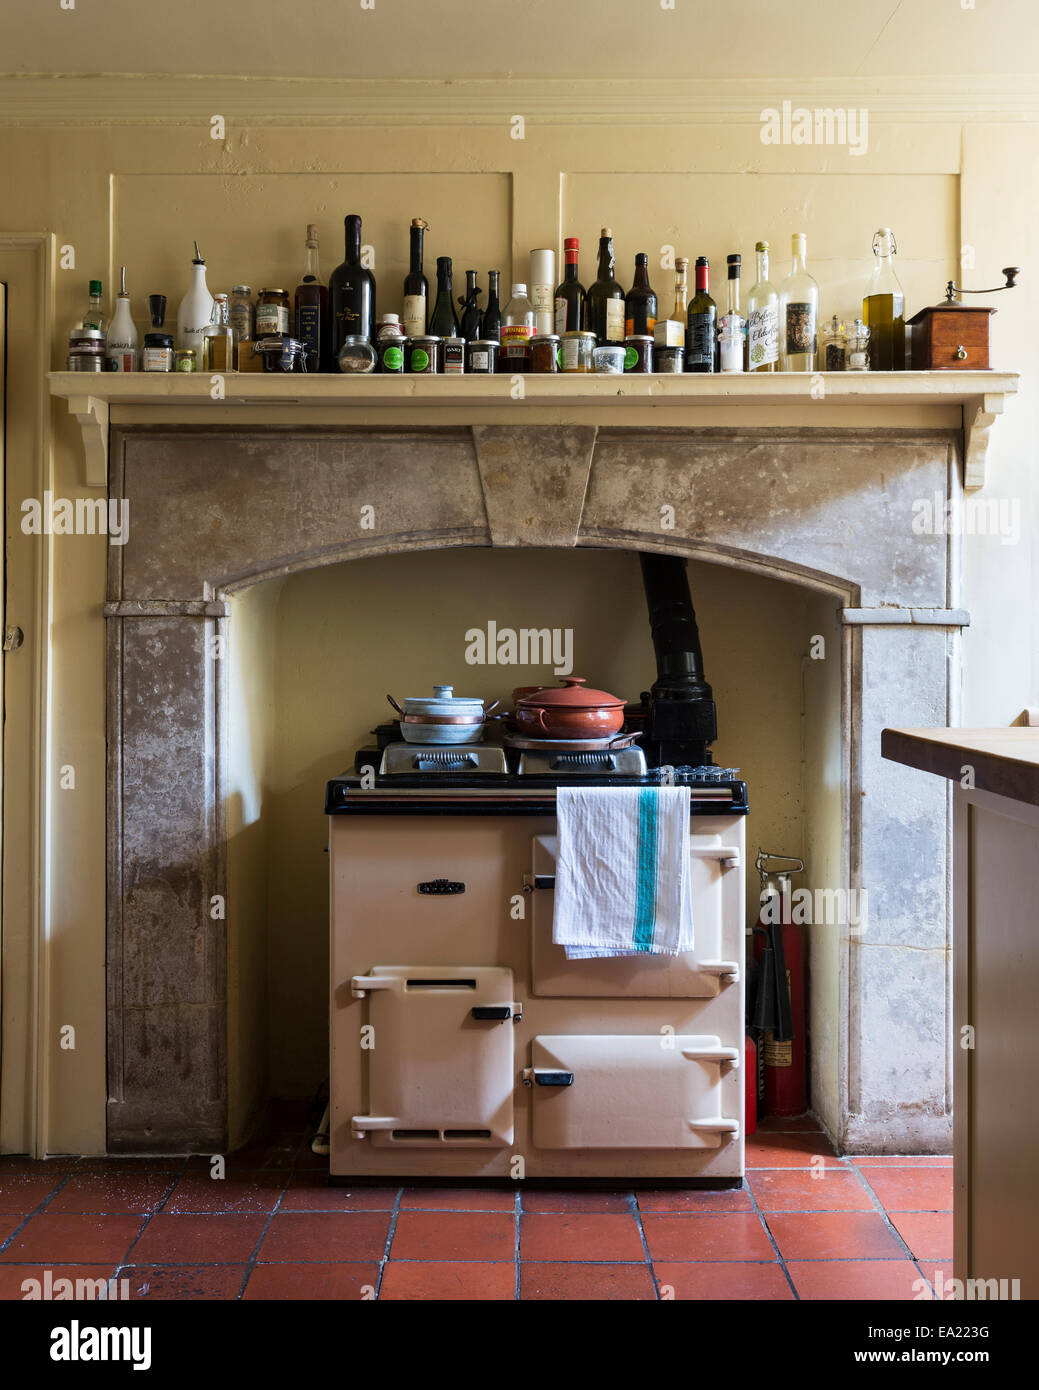 Rayburn cooker set back in large fireplace. Assorted bottles line the shelf above Stock Photo